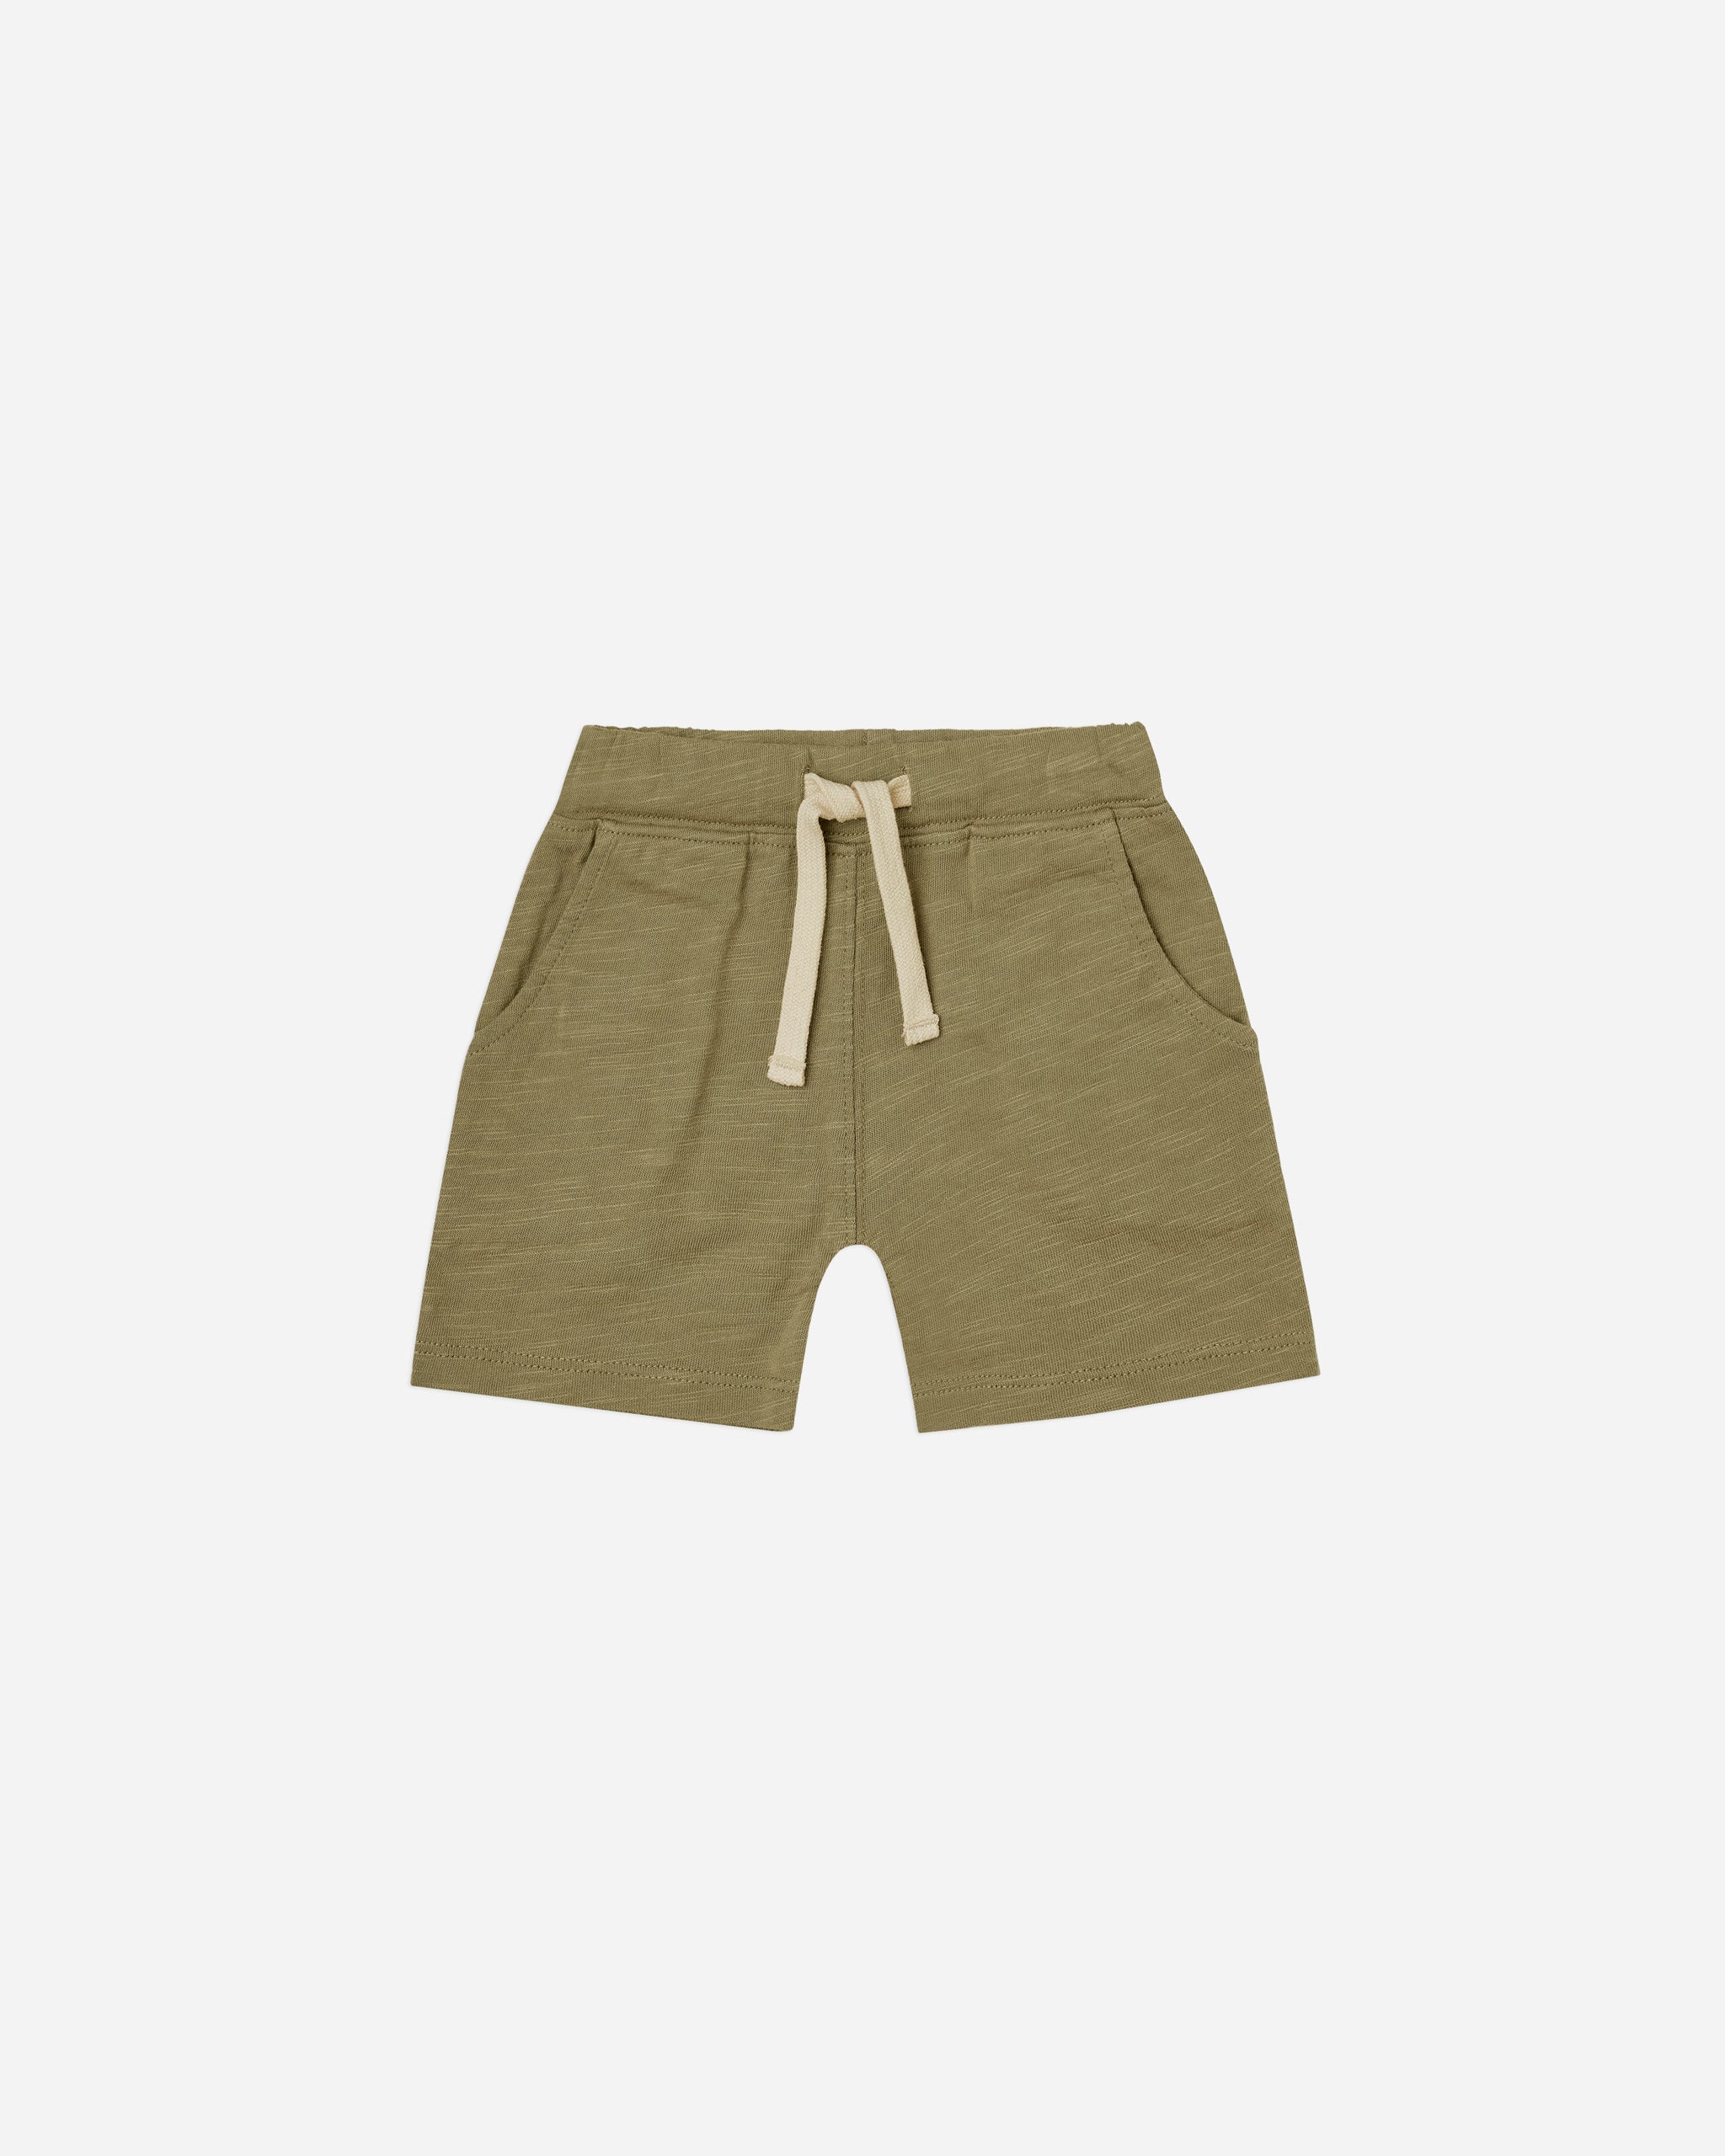 sam short || olive - Rylee + Cru | Kids Clothes | Trendy Baby Clothes | Modern Infant Outfits |